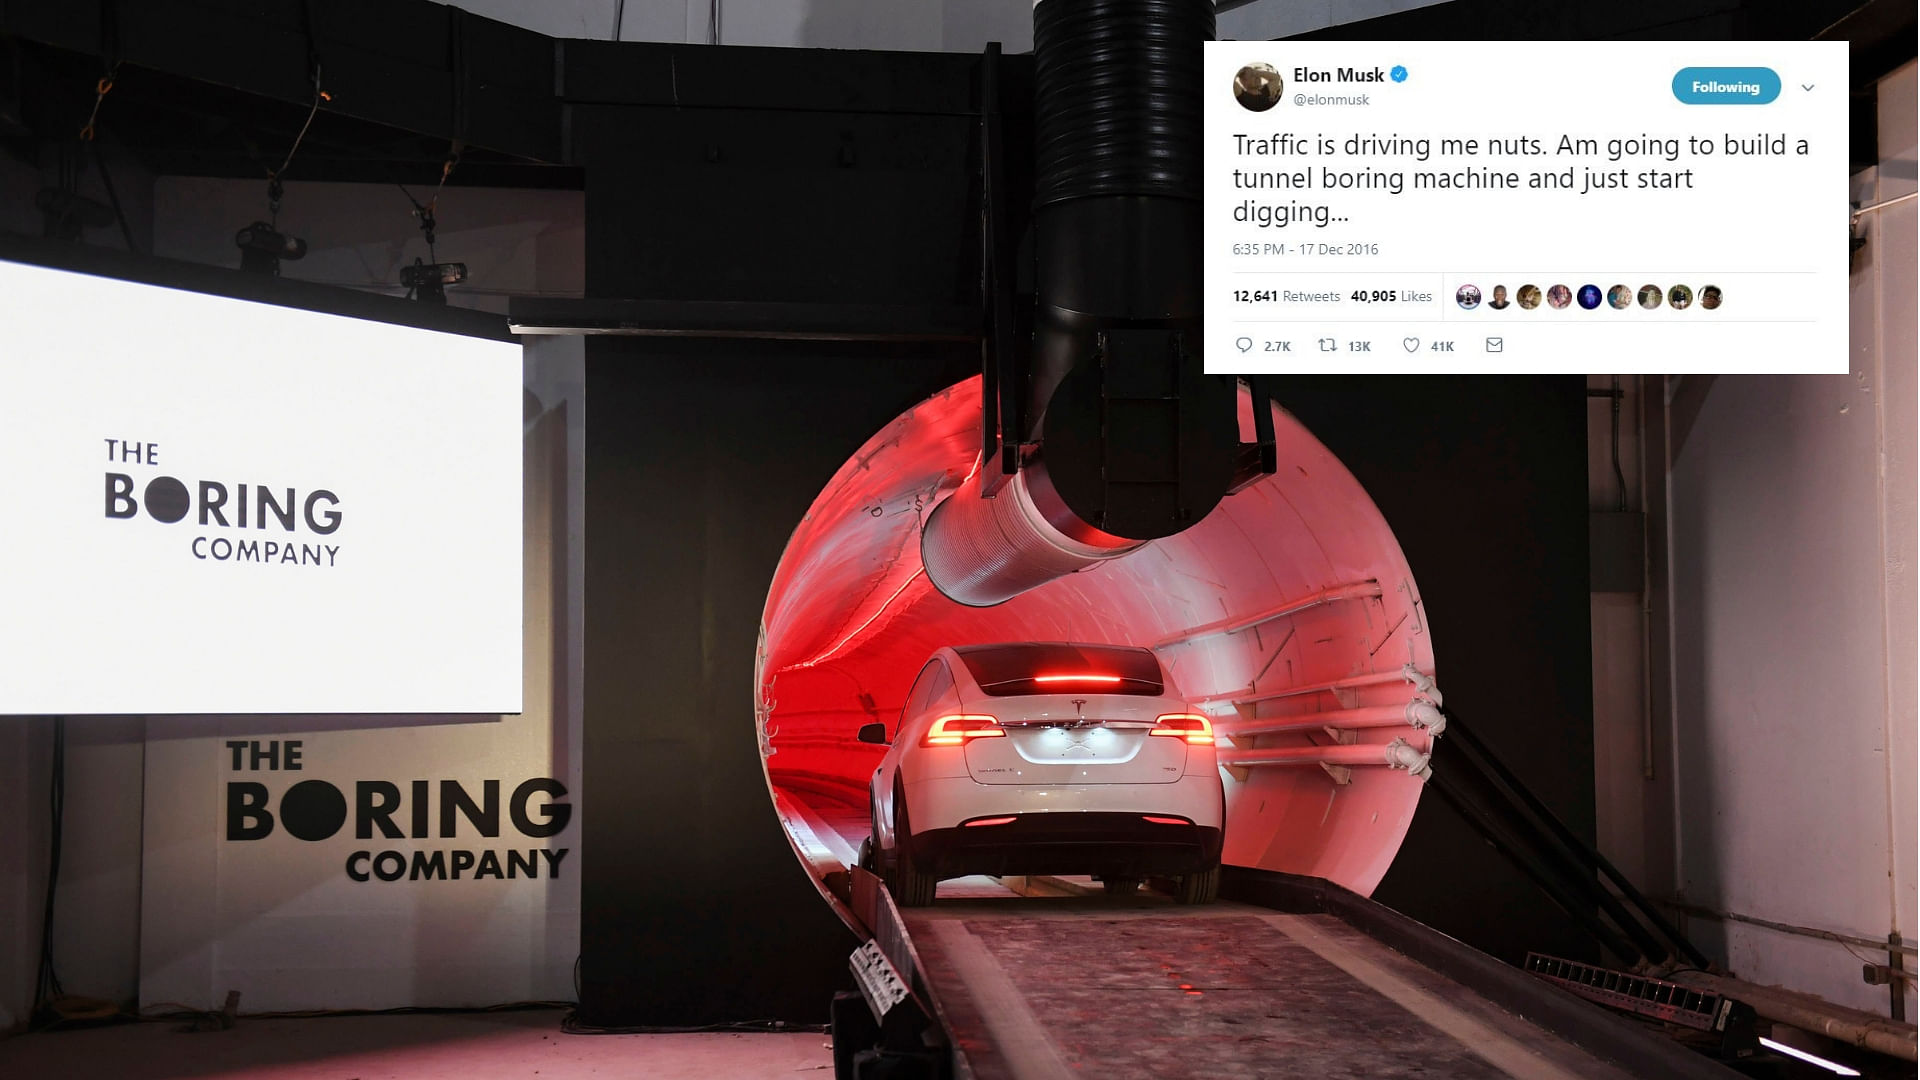 Elon Musk has unveiled the project about two years after he tweeted about the traffic in Los Angeles.